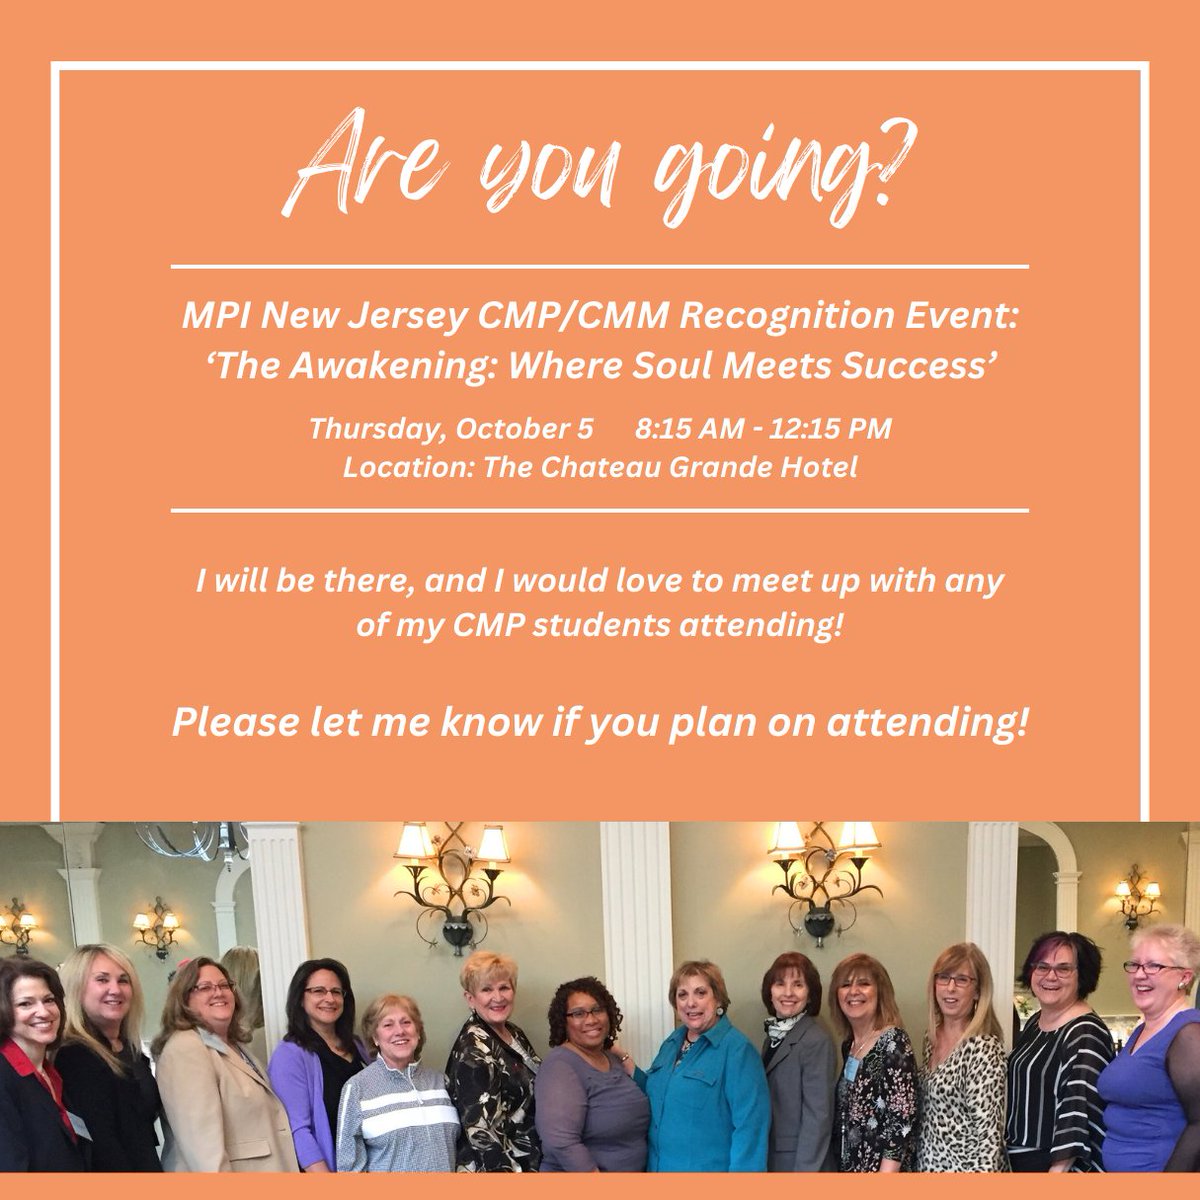 Please let me know if you are attending so we can meet up! You can contact me at Joanne@JoanneDennison.com.

web.cvent.com/event/abb17559…

#themeetguide #cmp #meetingsandevents #meetingprofs #eventprofs #miceindustry #hospitality #mpi #mpinj